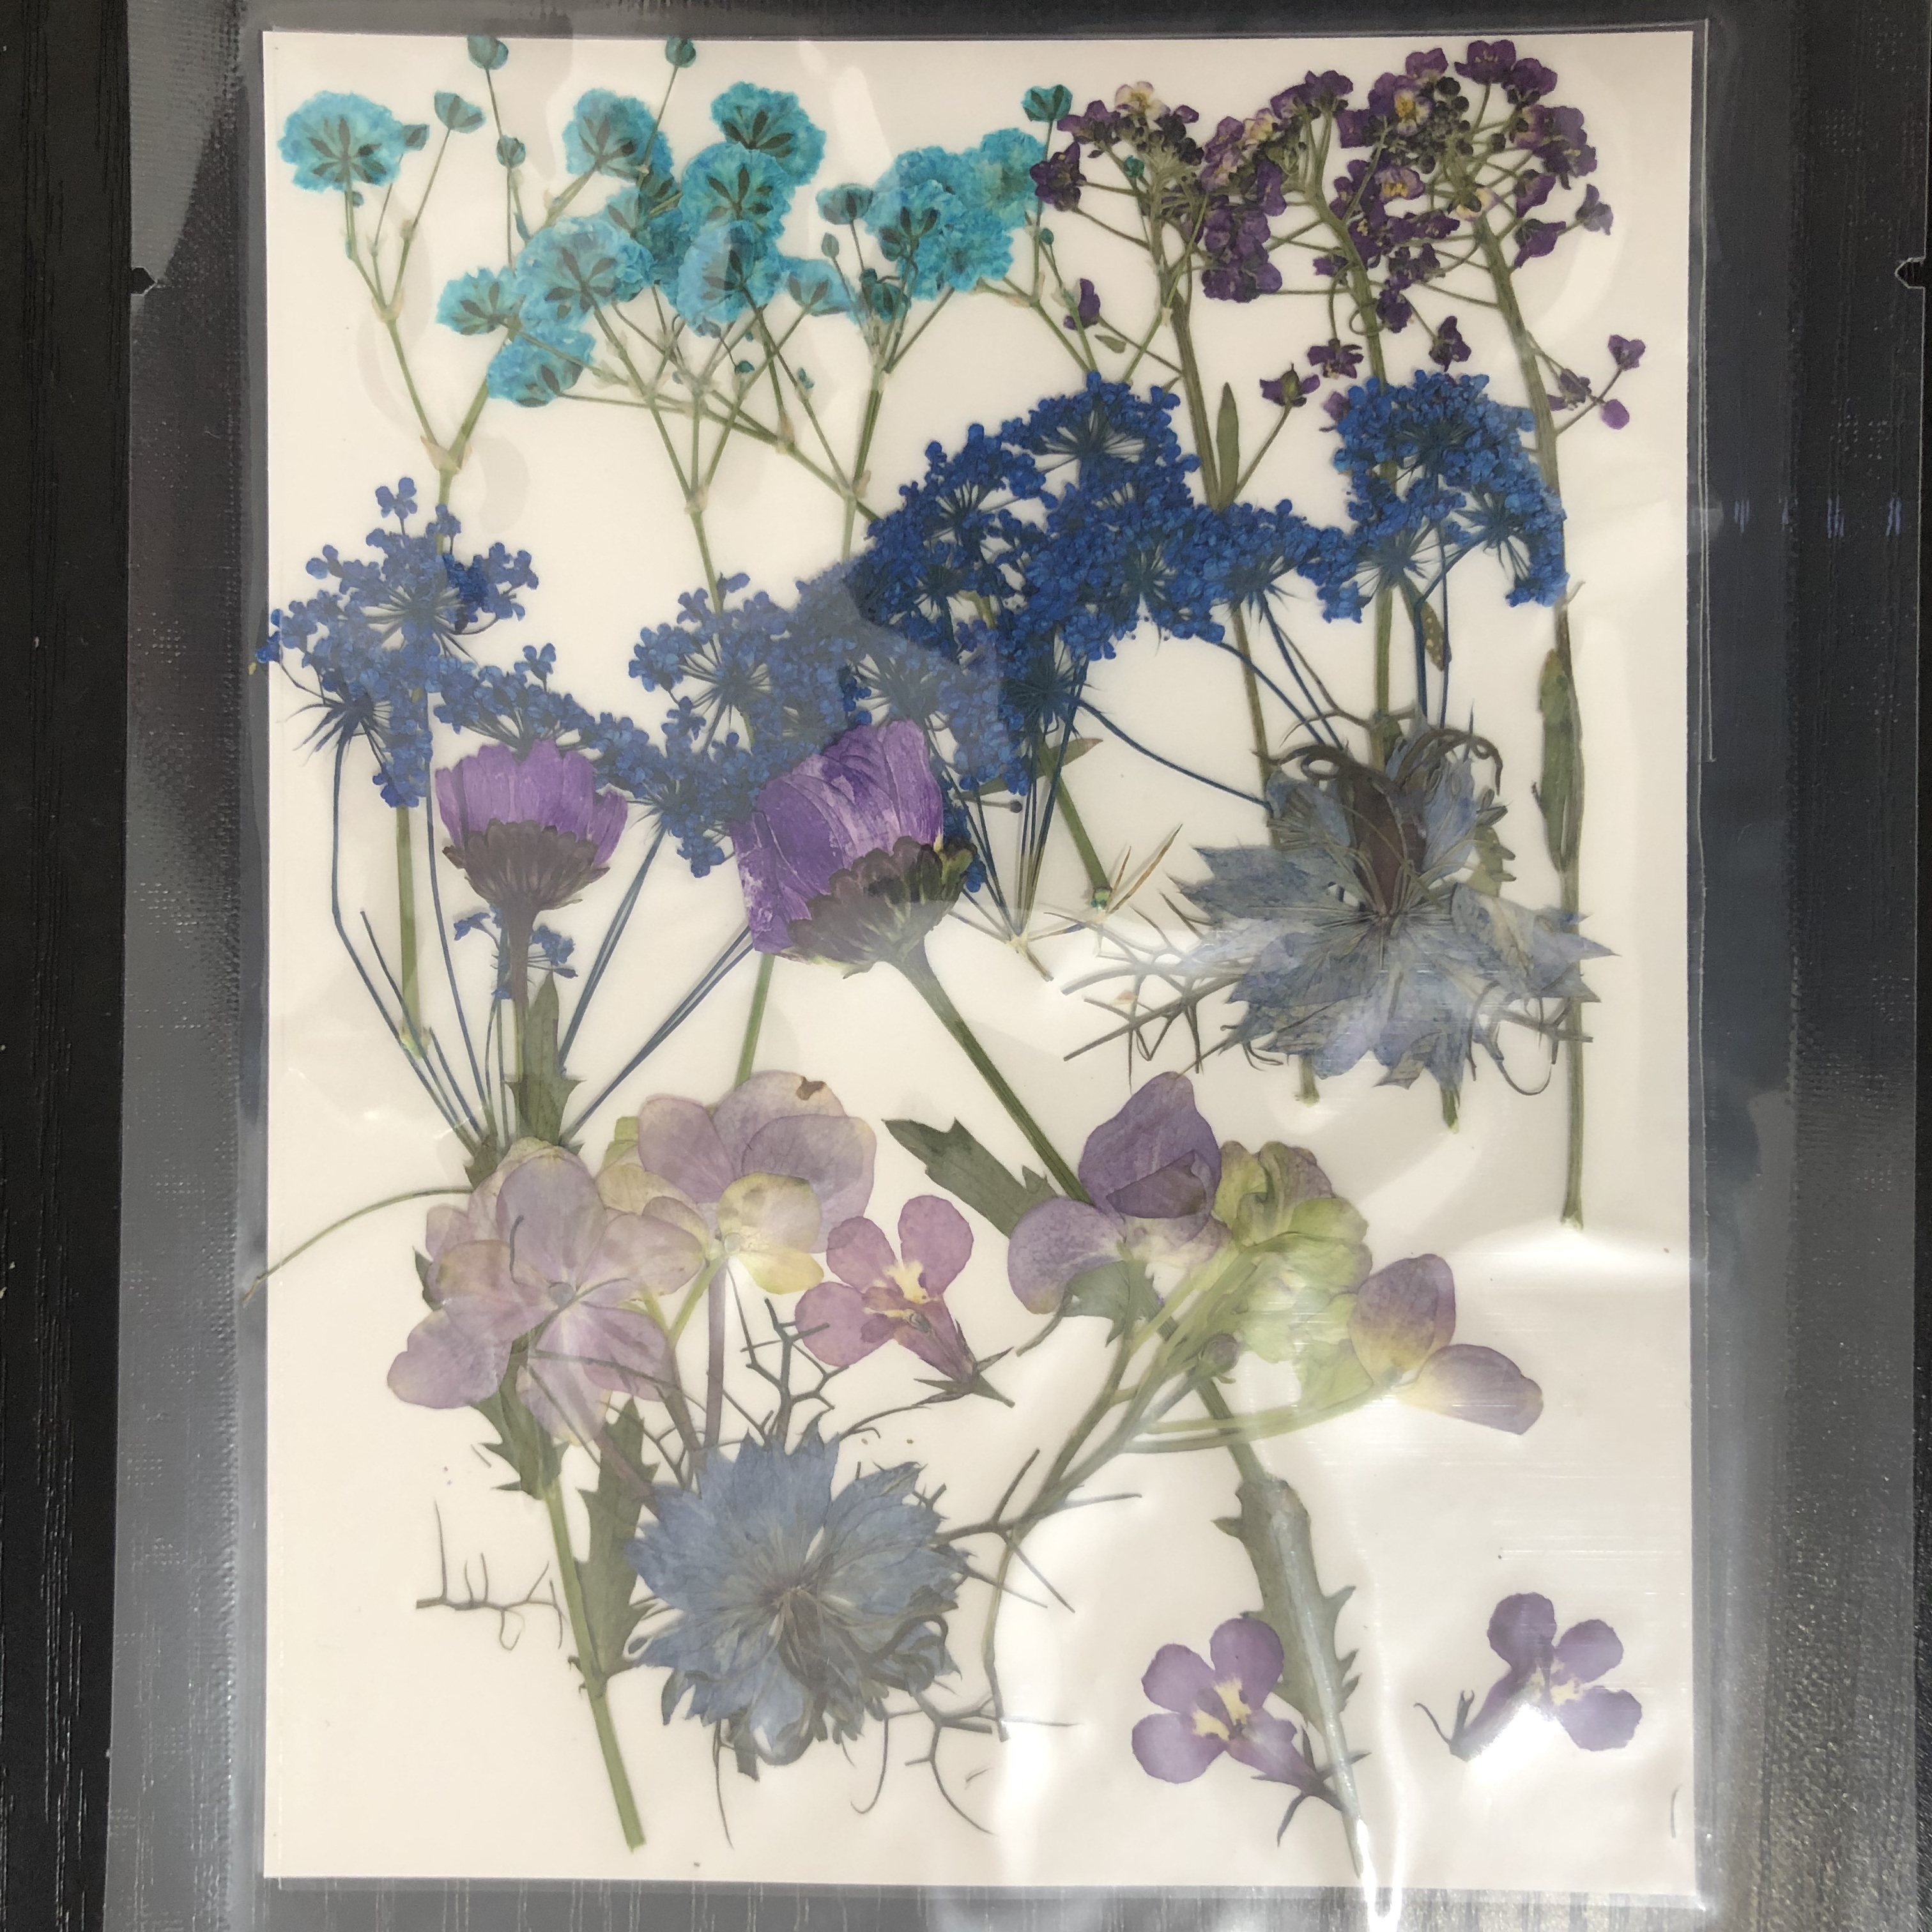 Pressed flower wall decor framed dried flowers wall hanging epoxy